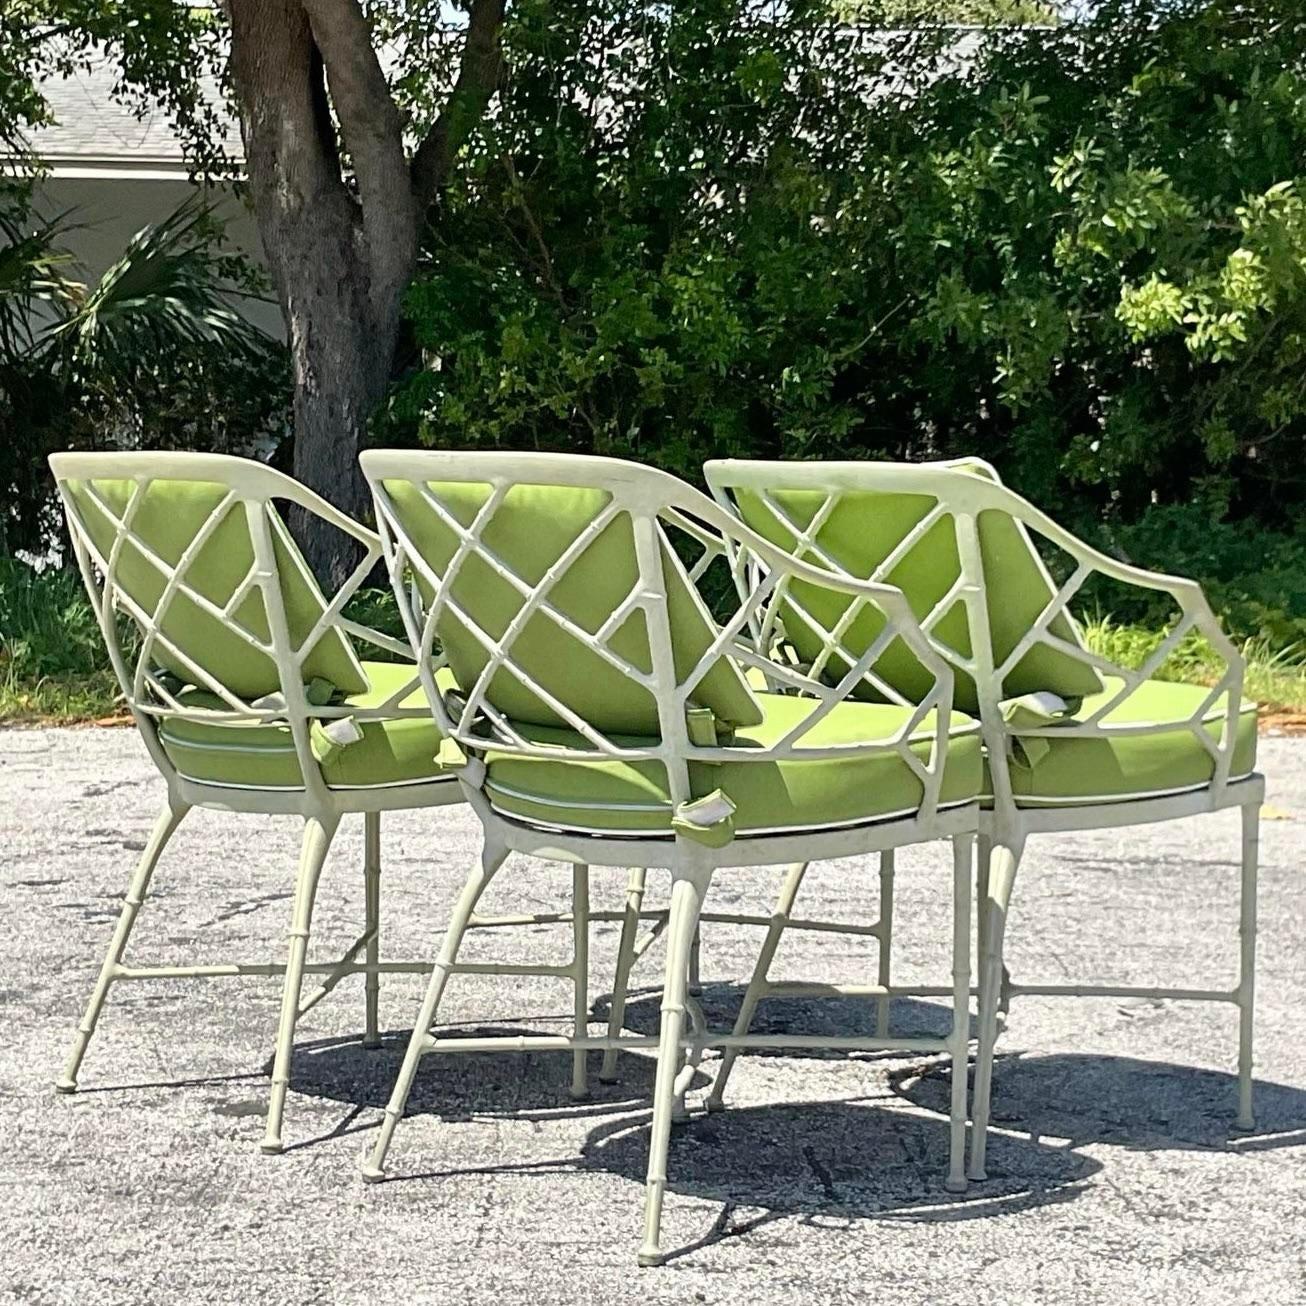 Vintage Boho “Calcutta” Dining Chairs After Brown Jordan - Set of 4 In Good Condition For Sale In west palm beach, FL